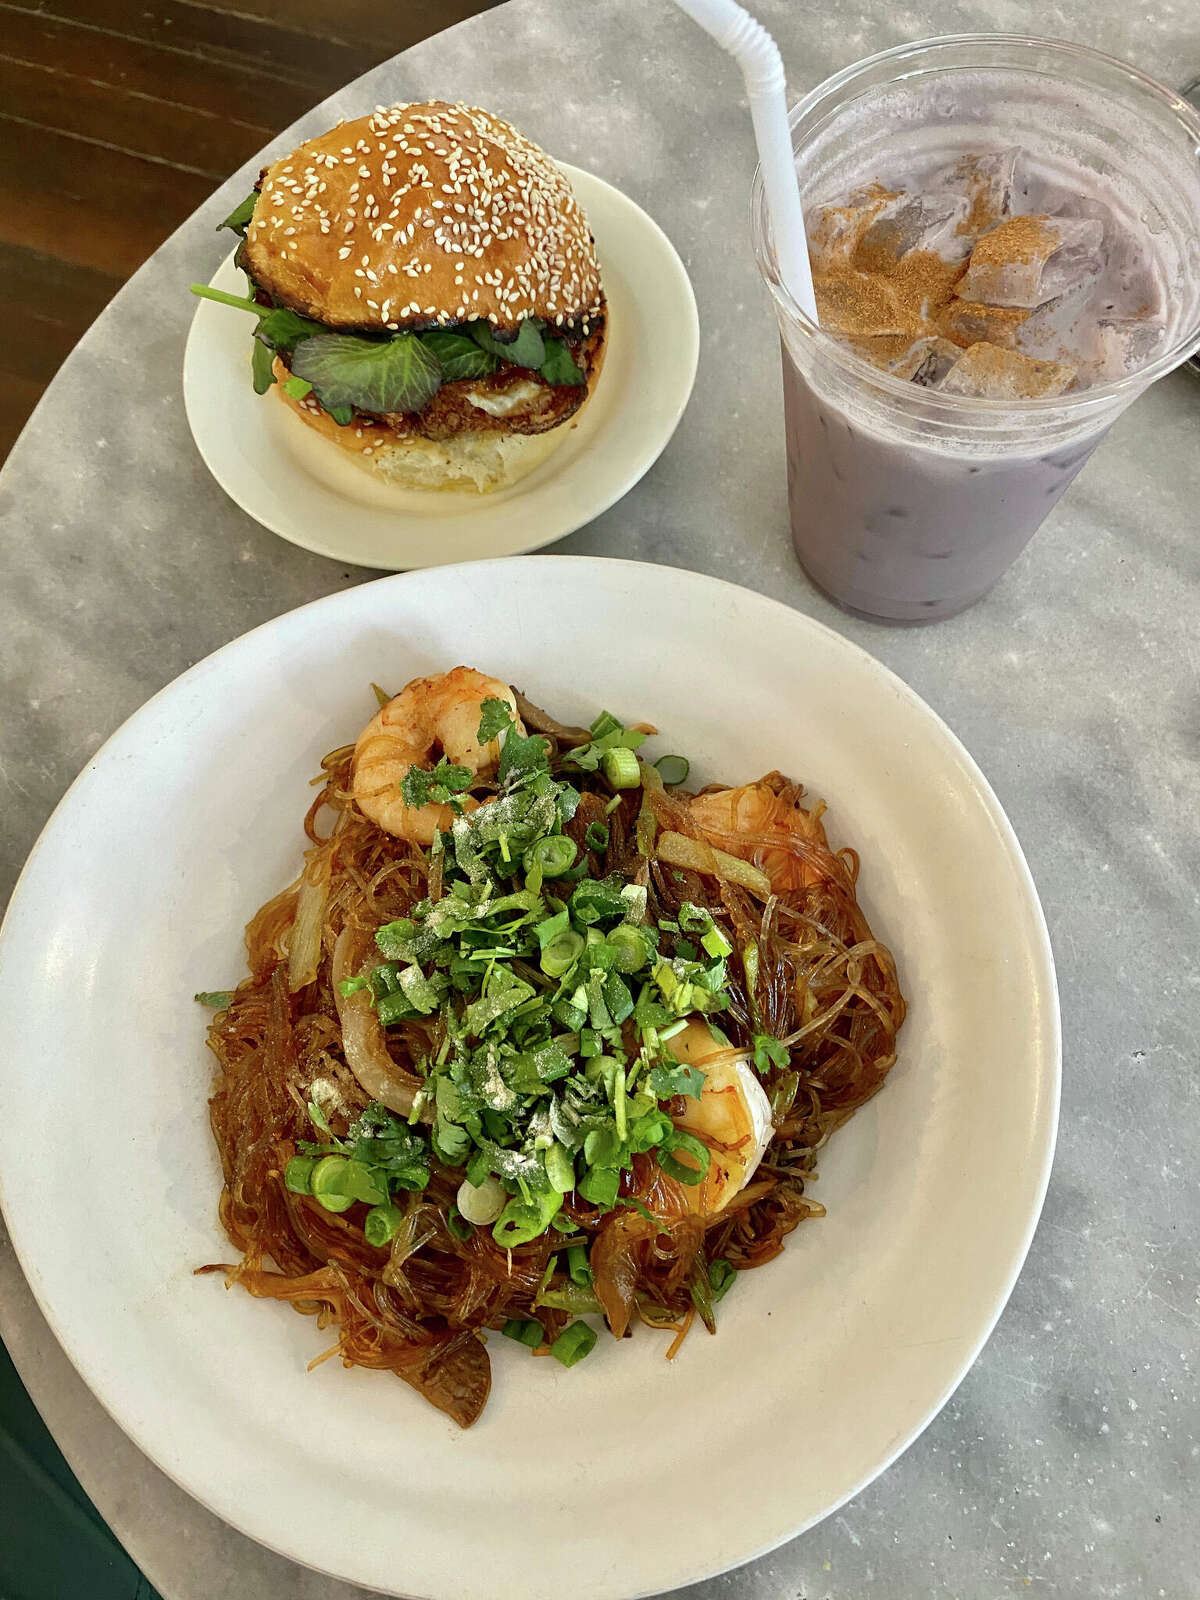 Clockwise from top left, Morningbird's breakfast sandwich, black-rice horchata and glass noodles with mushrooms, scallions and shrimp.